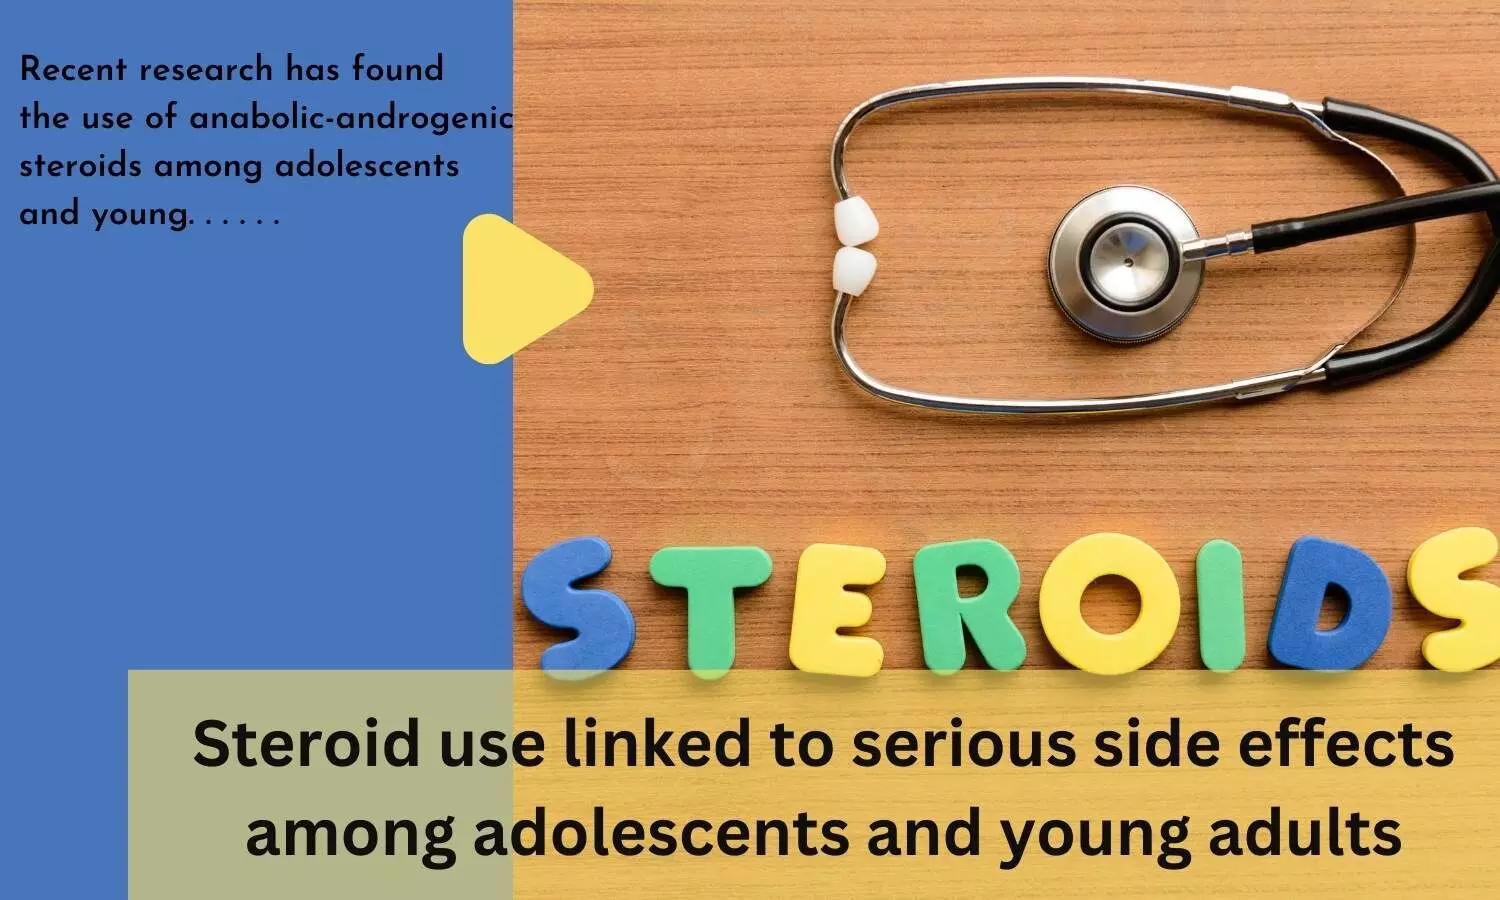 Steroid use linked to serious side effects among adolescents and young adults